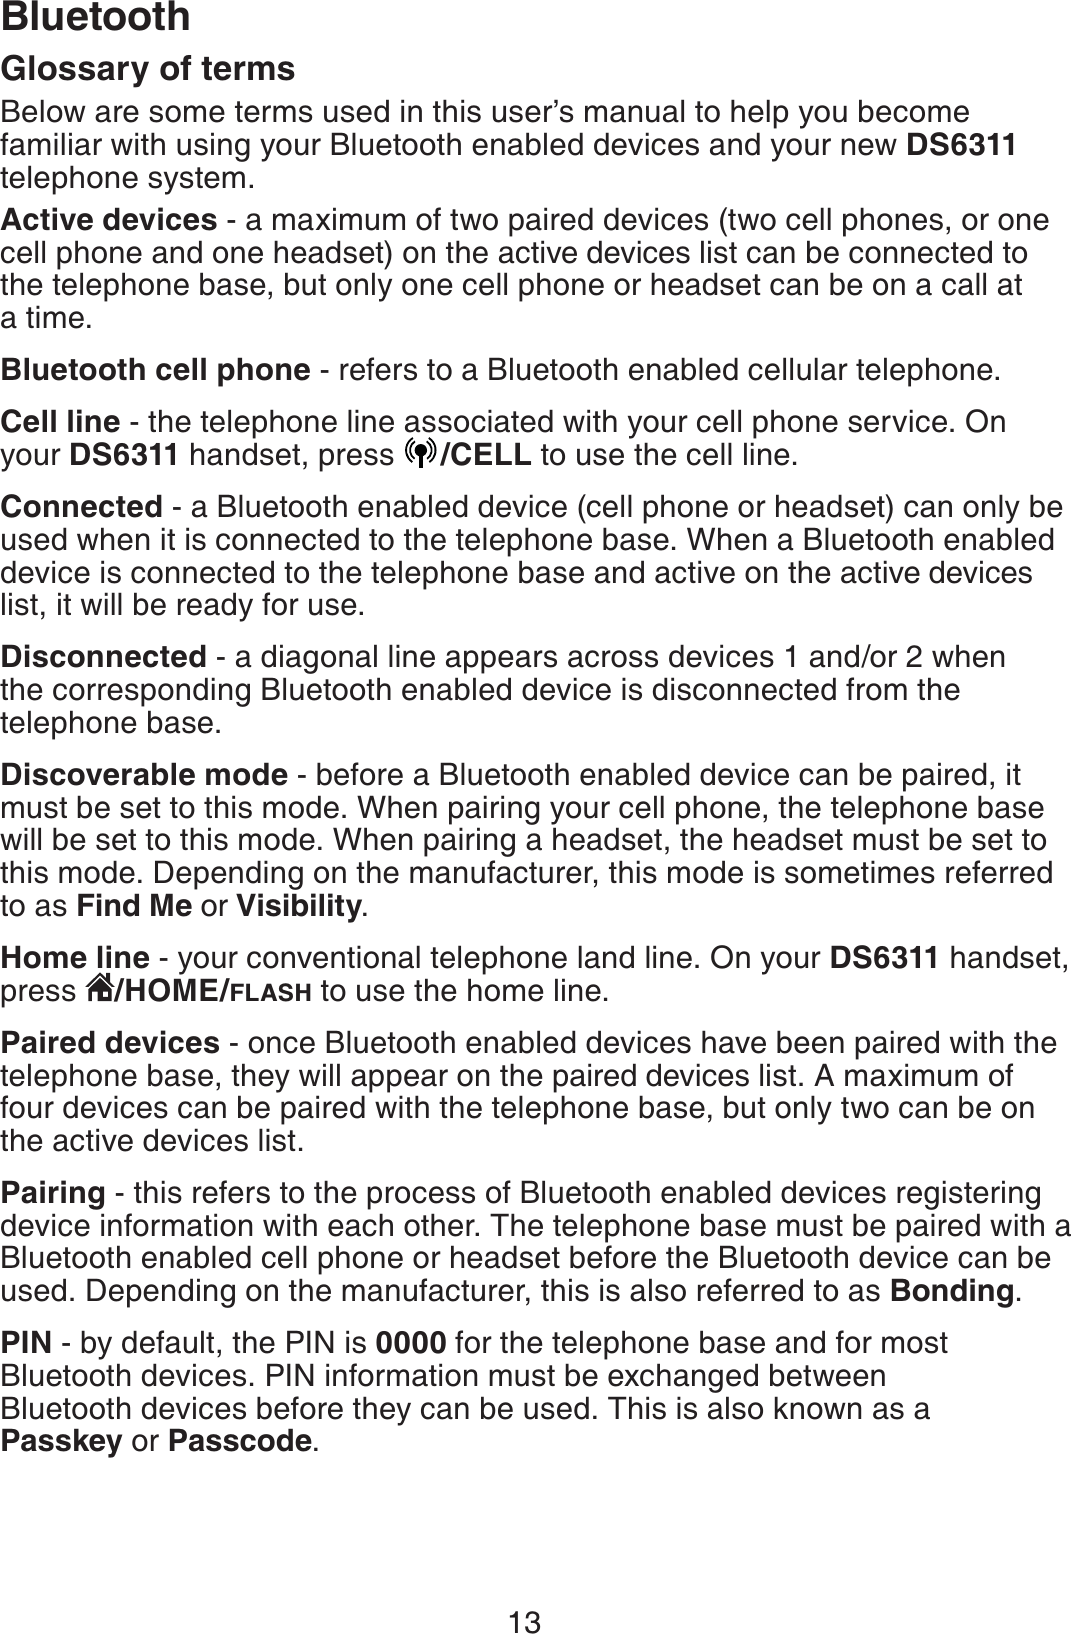 13BluetoothGlossary of terms Below are some terms used in this user’s manual to help you become familiar with using your Bluetooth enabled devices and your new DS6311telephone system.Active devices - a maximum of two paired devices (two cell phones, or one cell phone and one headset) on the active devices list can be connected to the telephone base, but only one cell phone or headset can be on a call at a time. Bluetooth cell phone - refers to a Bluetooth enabled cellular telephone.Cell line - the telephone line associated with your cell phone service. On your DS6311 handset, press  /CELL to use the cell line.Connected - a Bluetooth enabled device (cell phone or headset) can only be used when it is connected to the telephone base. When a Bluetooth enabled device is connected to the telephone base and active on the active devices list, it will be ready for use.Disconnected - a diagonal line appears across devices 1 and/or 2 when the corresponding Bluetooth enabled device is disconnected from the telephone base.Discoverable mode - before a Bluetooth enabled device can be paired, it must be set to this mode. When pairing your cell phone, the telephone base will be set to this mode. When pairing a headset, the headset must be set to this mode. Depending on the manufacturer, this mode is sometimes referred to as Find Me or Visibility.Home line - your conventional telephone land line. On your DS6311 handset, press  /HOME/FLASH to use the home line.Paired devices - once Bluetooth enabled devices have been paired with the telephone base, they will appear on the paired devices list. A maximum of four devices can be paired with the telephone base, but only two can be on the active devices list.Pairing - this refers to the process of Bluetooth enabled devices registering device information with each other. The telephone base must be paired with a Bluetooth enabled cell phone or headset before the Bluetooth device can be used. Depending on the manufacturer, this is also referred to as Bonding.PIN - by default, the PIN is 0000 for the telephone base and for most Bluetooth devices. PIN information must be exchanged between Bluetooth devices before they can be used. This is also known as a Passkey or Passcode.